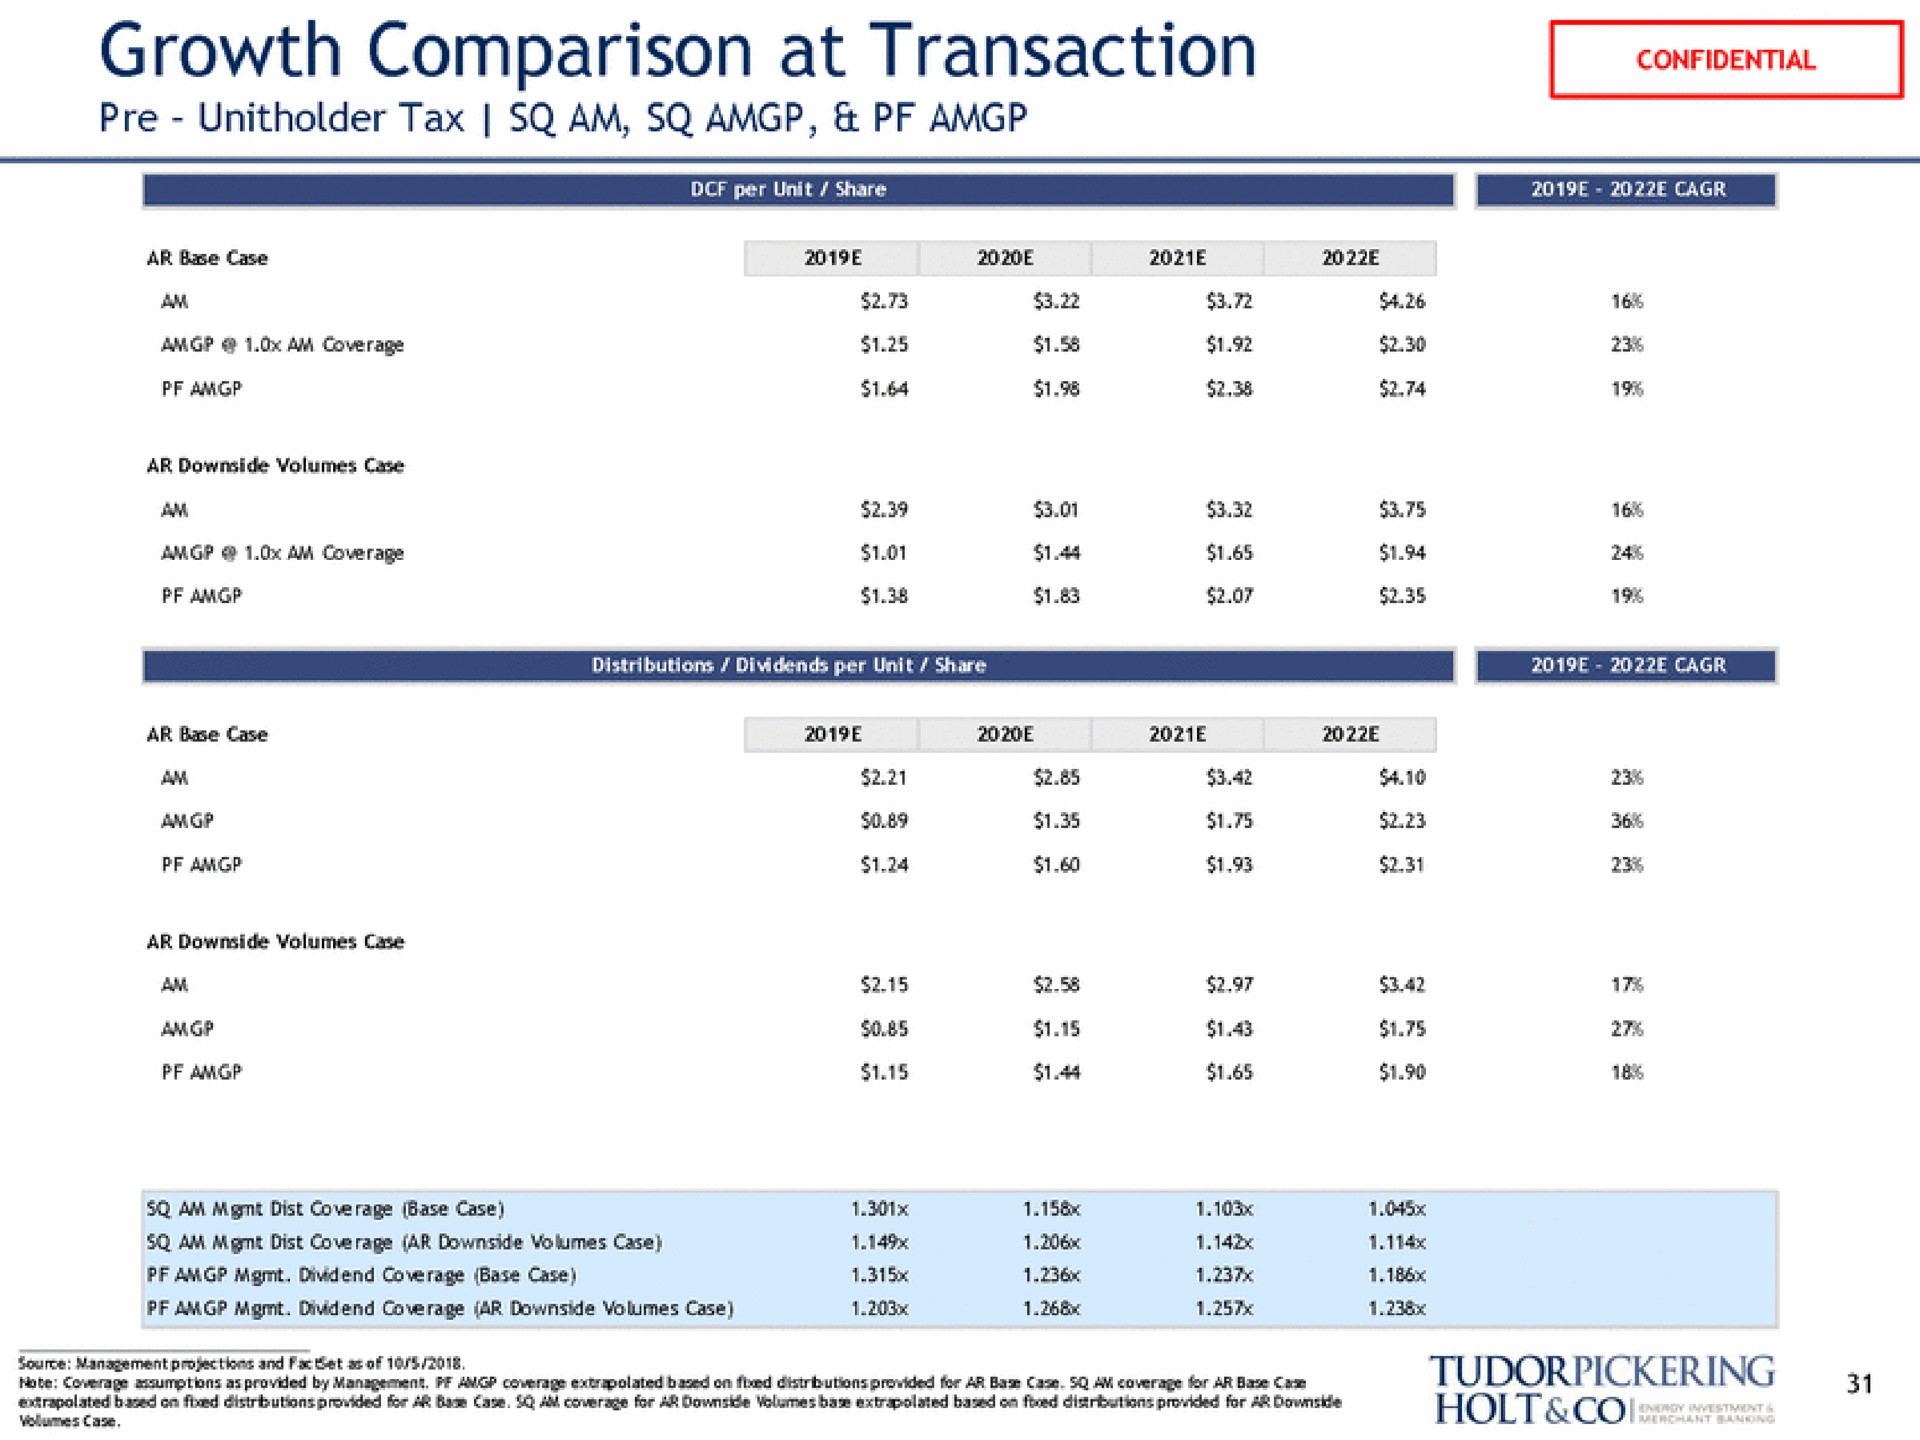 growth comparison at transaction tax am | Tudor, Pickering, Holt & Co